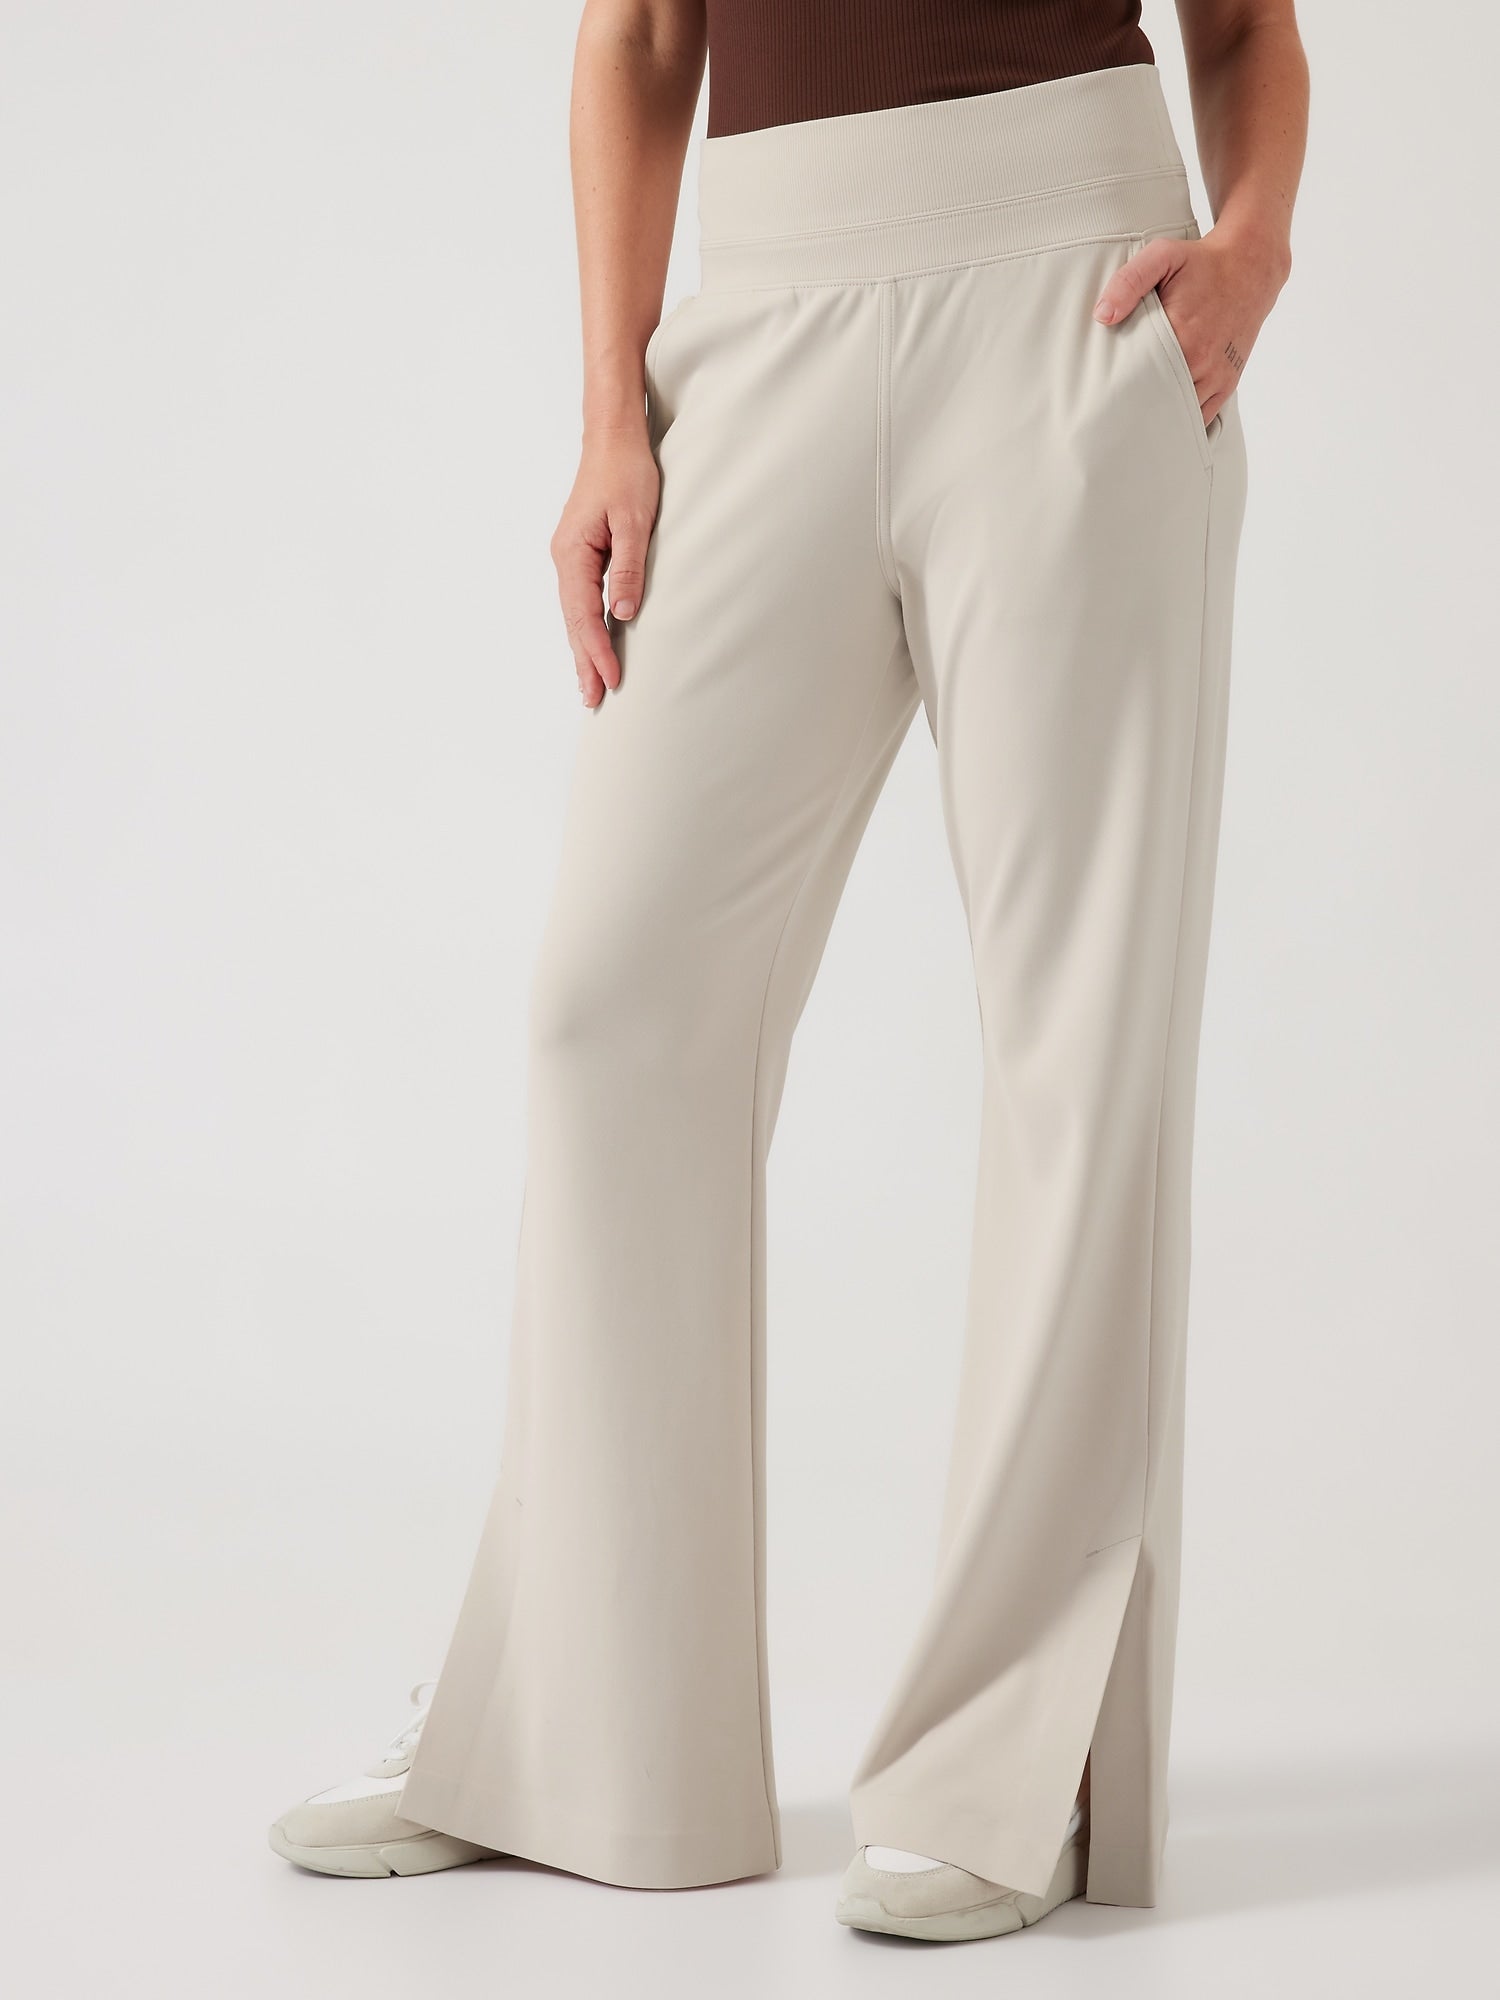 Athleta Venice Flare Pant – Search By Inseam